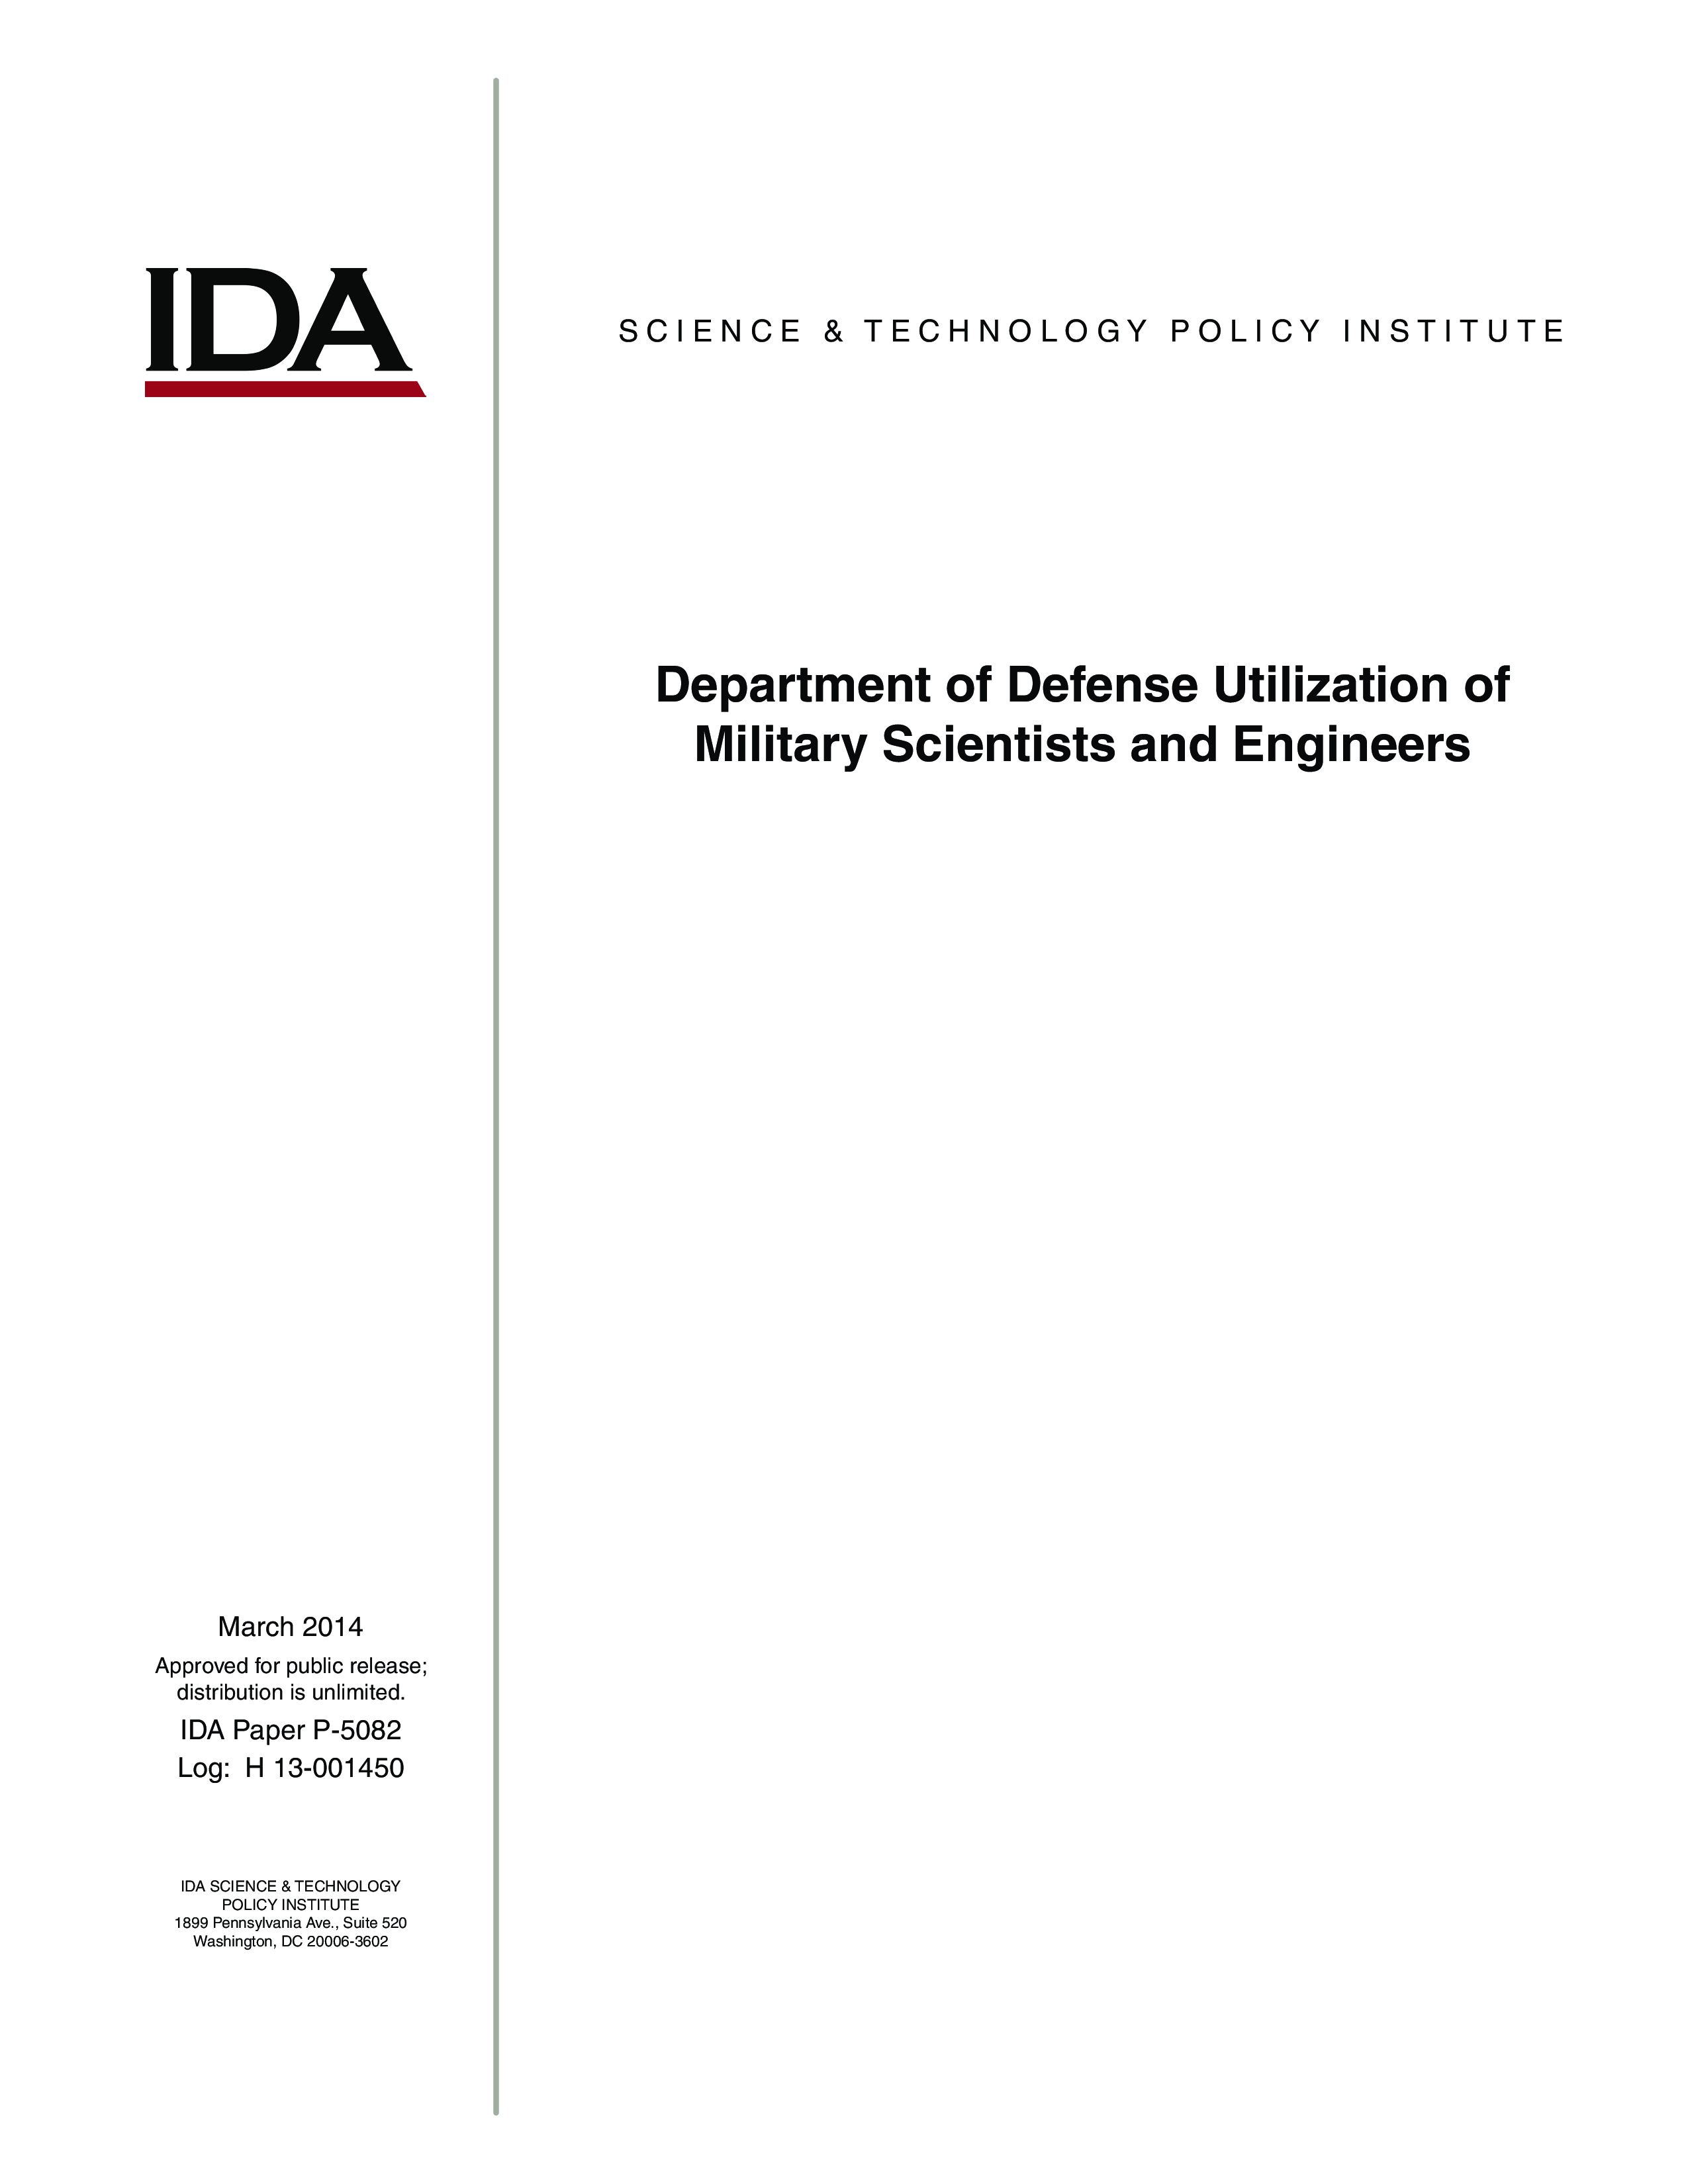 Department of Defense Utilization of Military Scientists and Engineers